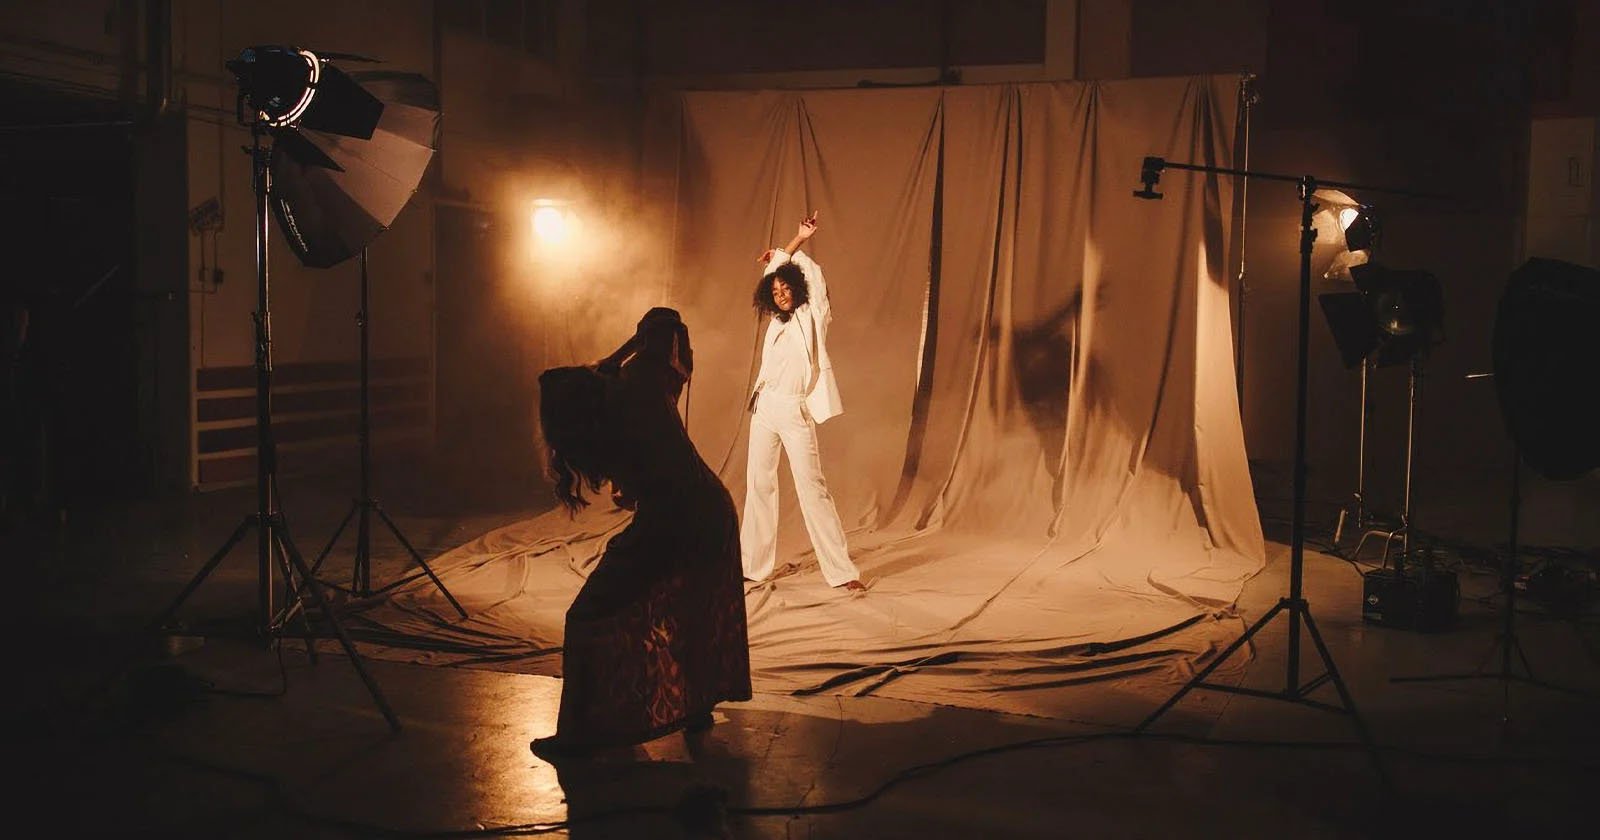 A woman in a white suit poses confidently on a dimly lit set with dramatic fabric drapes behind her. Another person silhouettes against the light, seemingly photographing or observing the scene. Studio lights and equipment surround them, casting warm, moody tones.